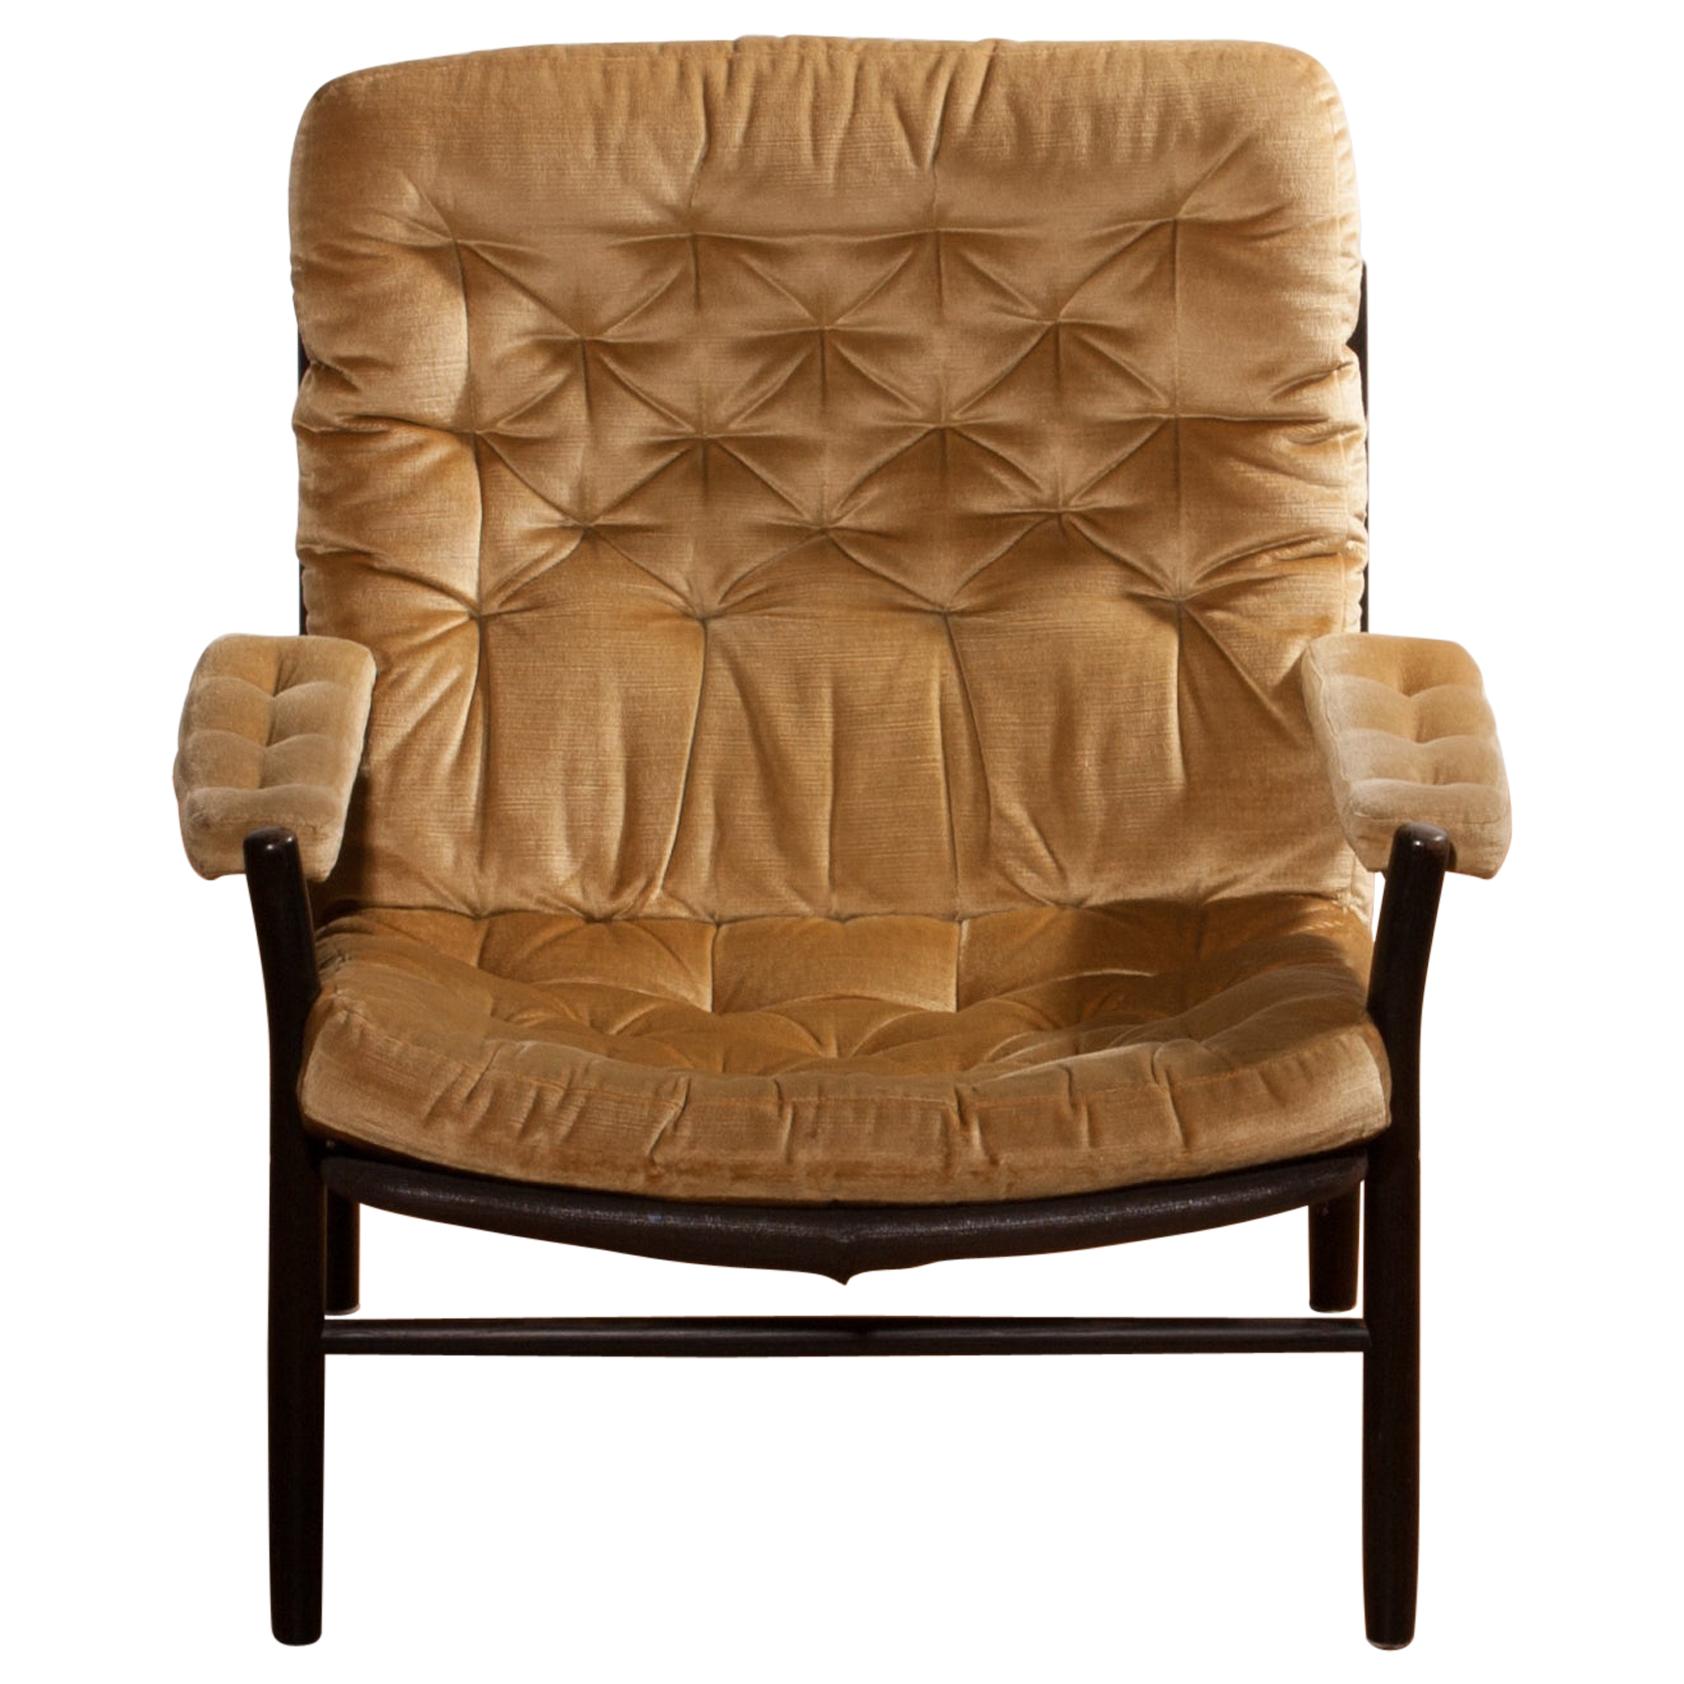 This chair in gold-yellow velours with a black wooden frame was designed by Kenneth Bergenblad and manufactured by DUX, Sweden.
It is in good condition.
Period 1970s.
Dimensions: H 83 cm, W 80 cm, D 69 cm, SH 37 cm.